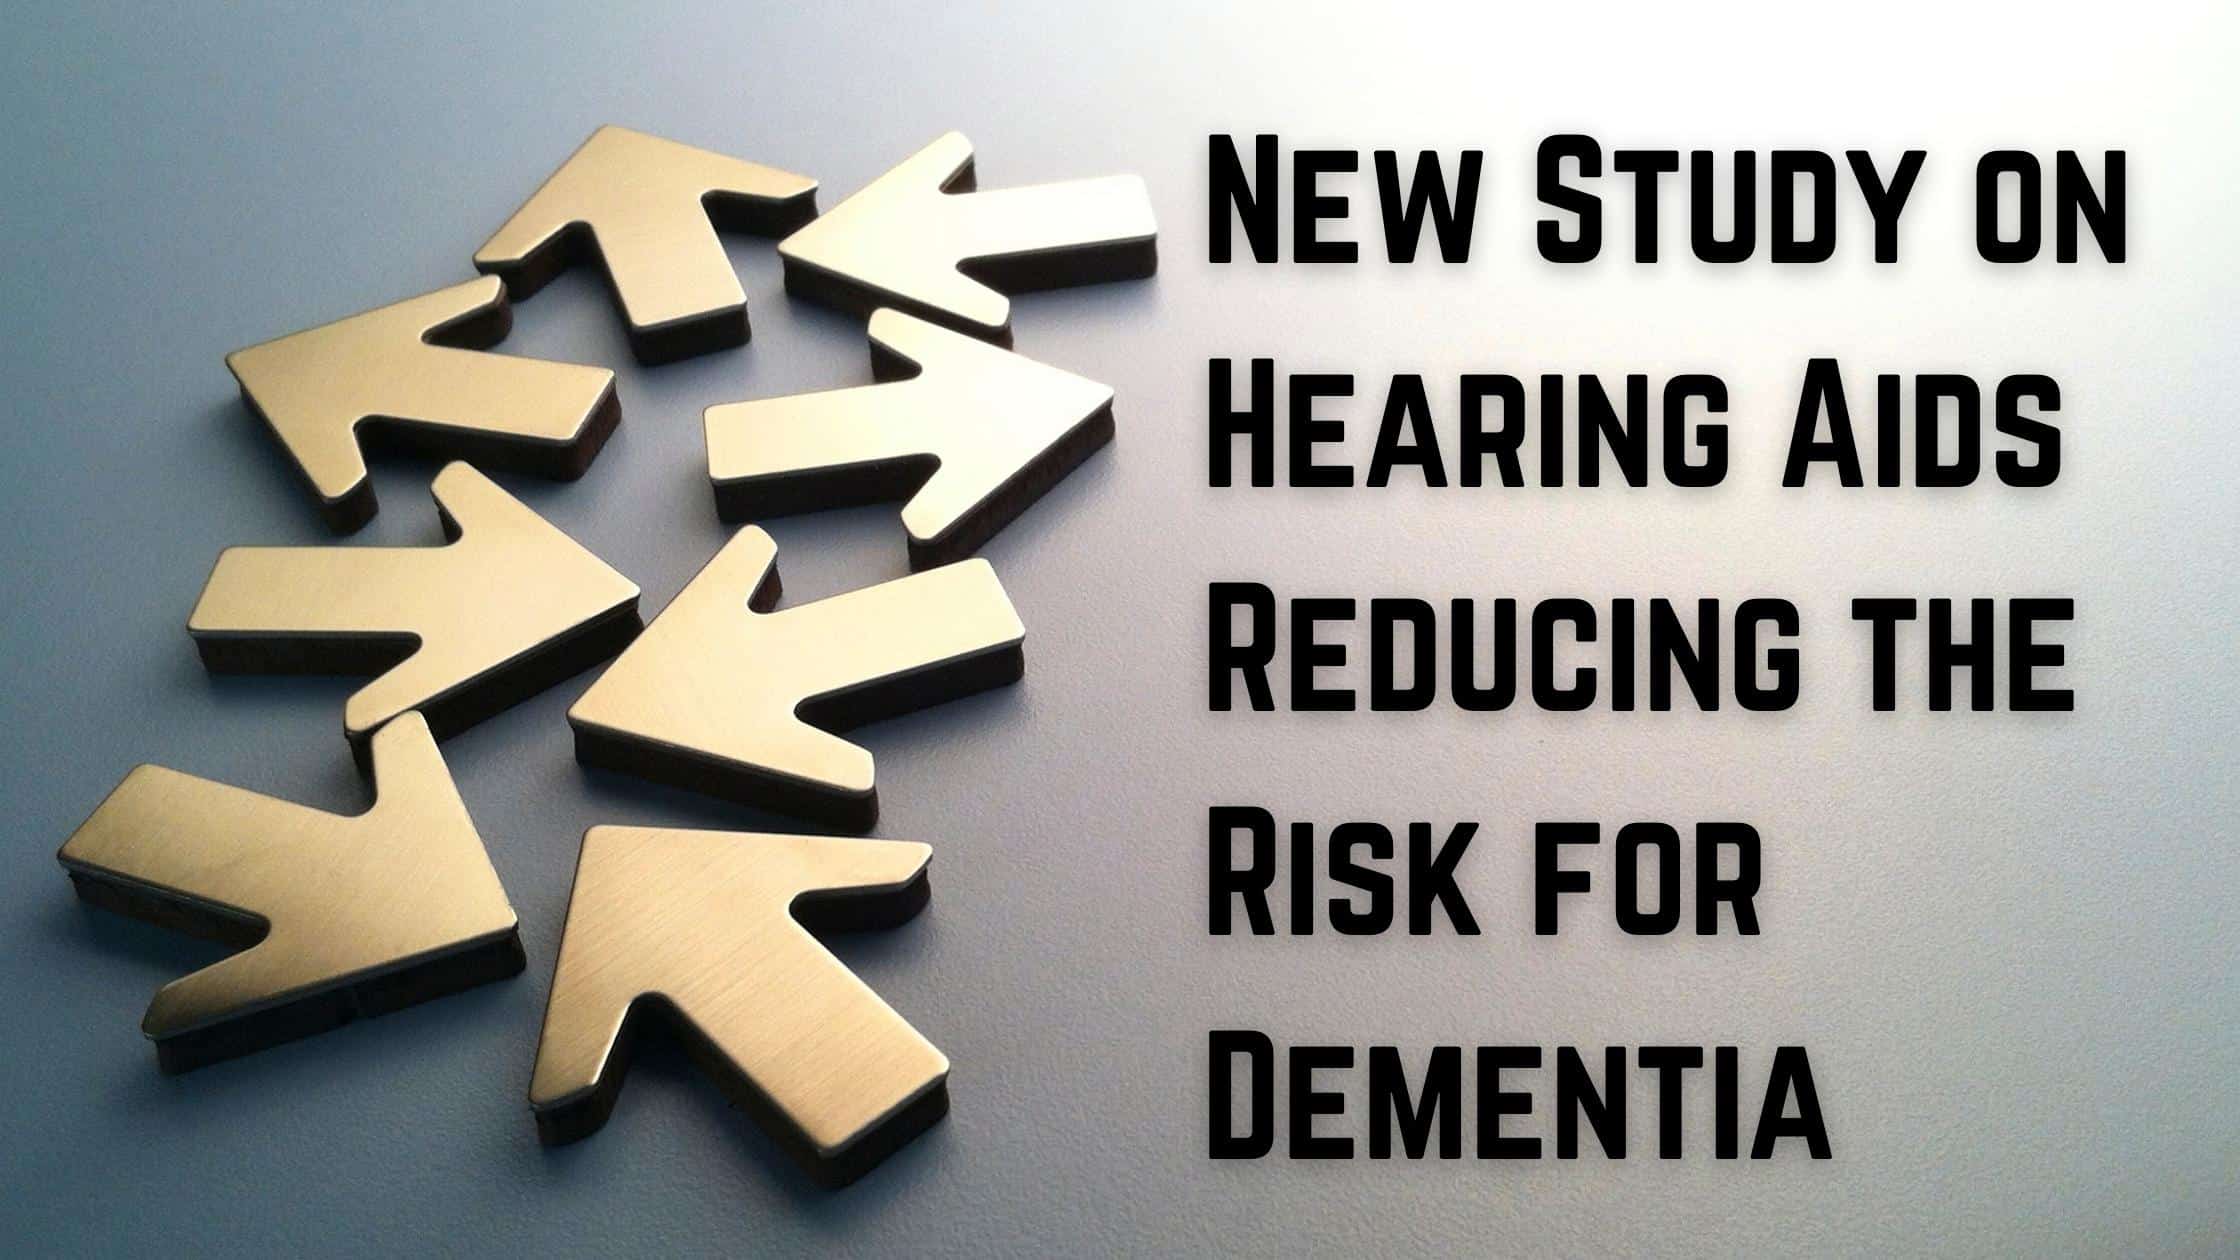 New Study on Hearing Aids Reducing the Risk for Dementia